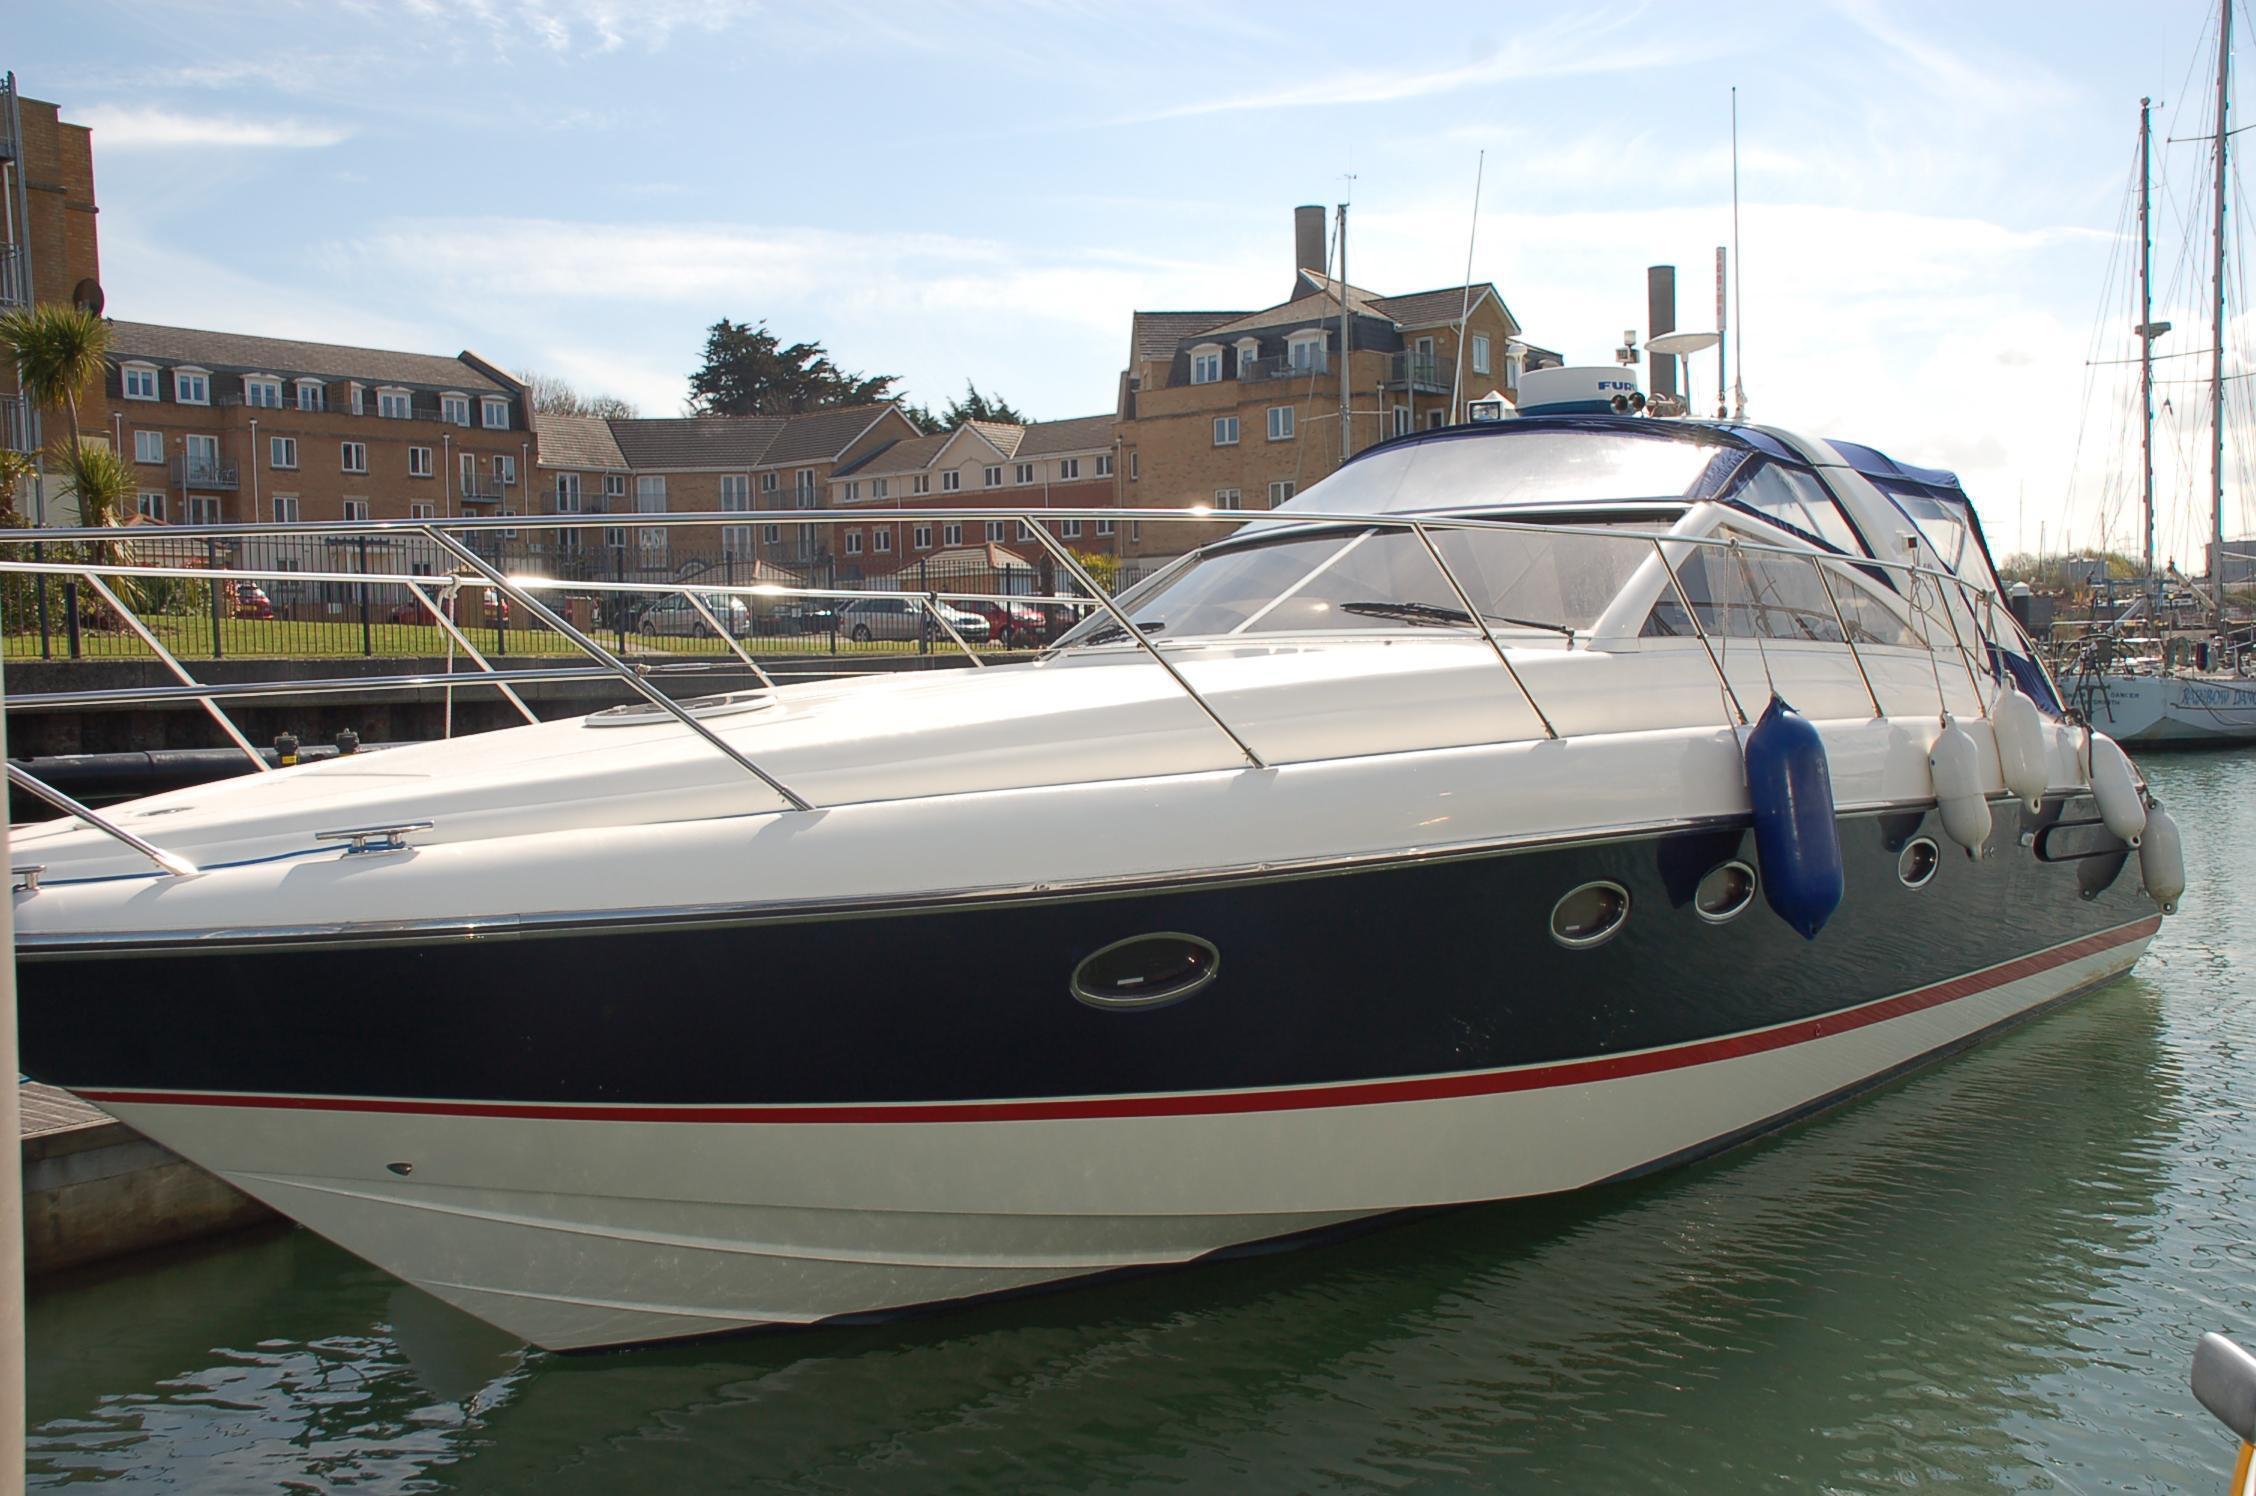 Princess V40, Cowes, Isle of Wight